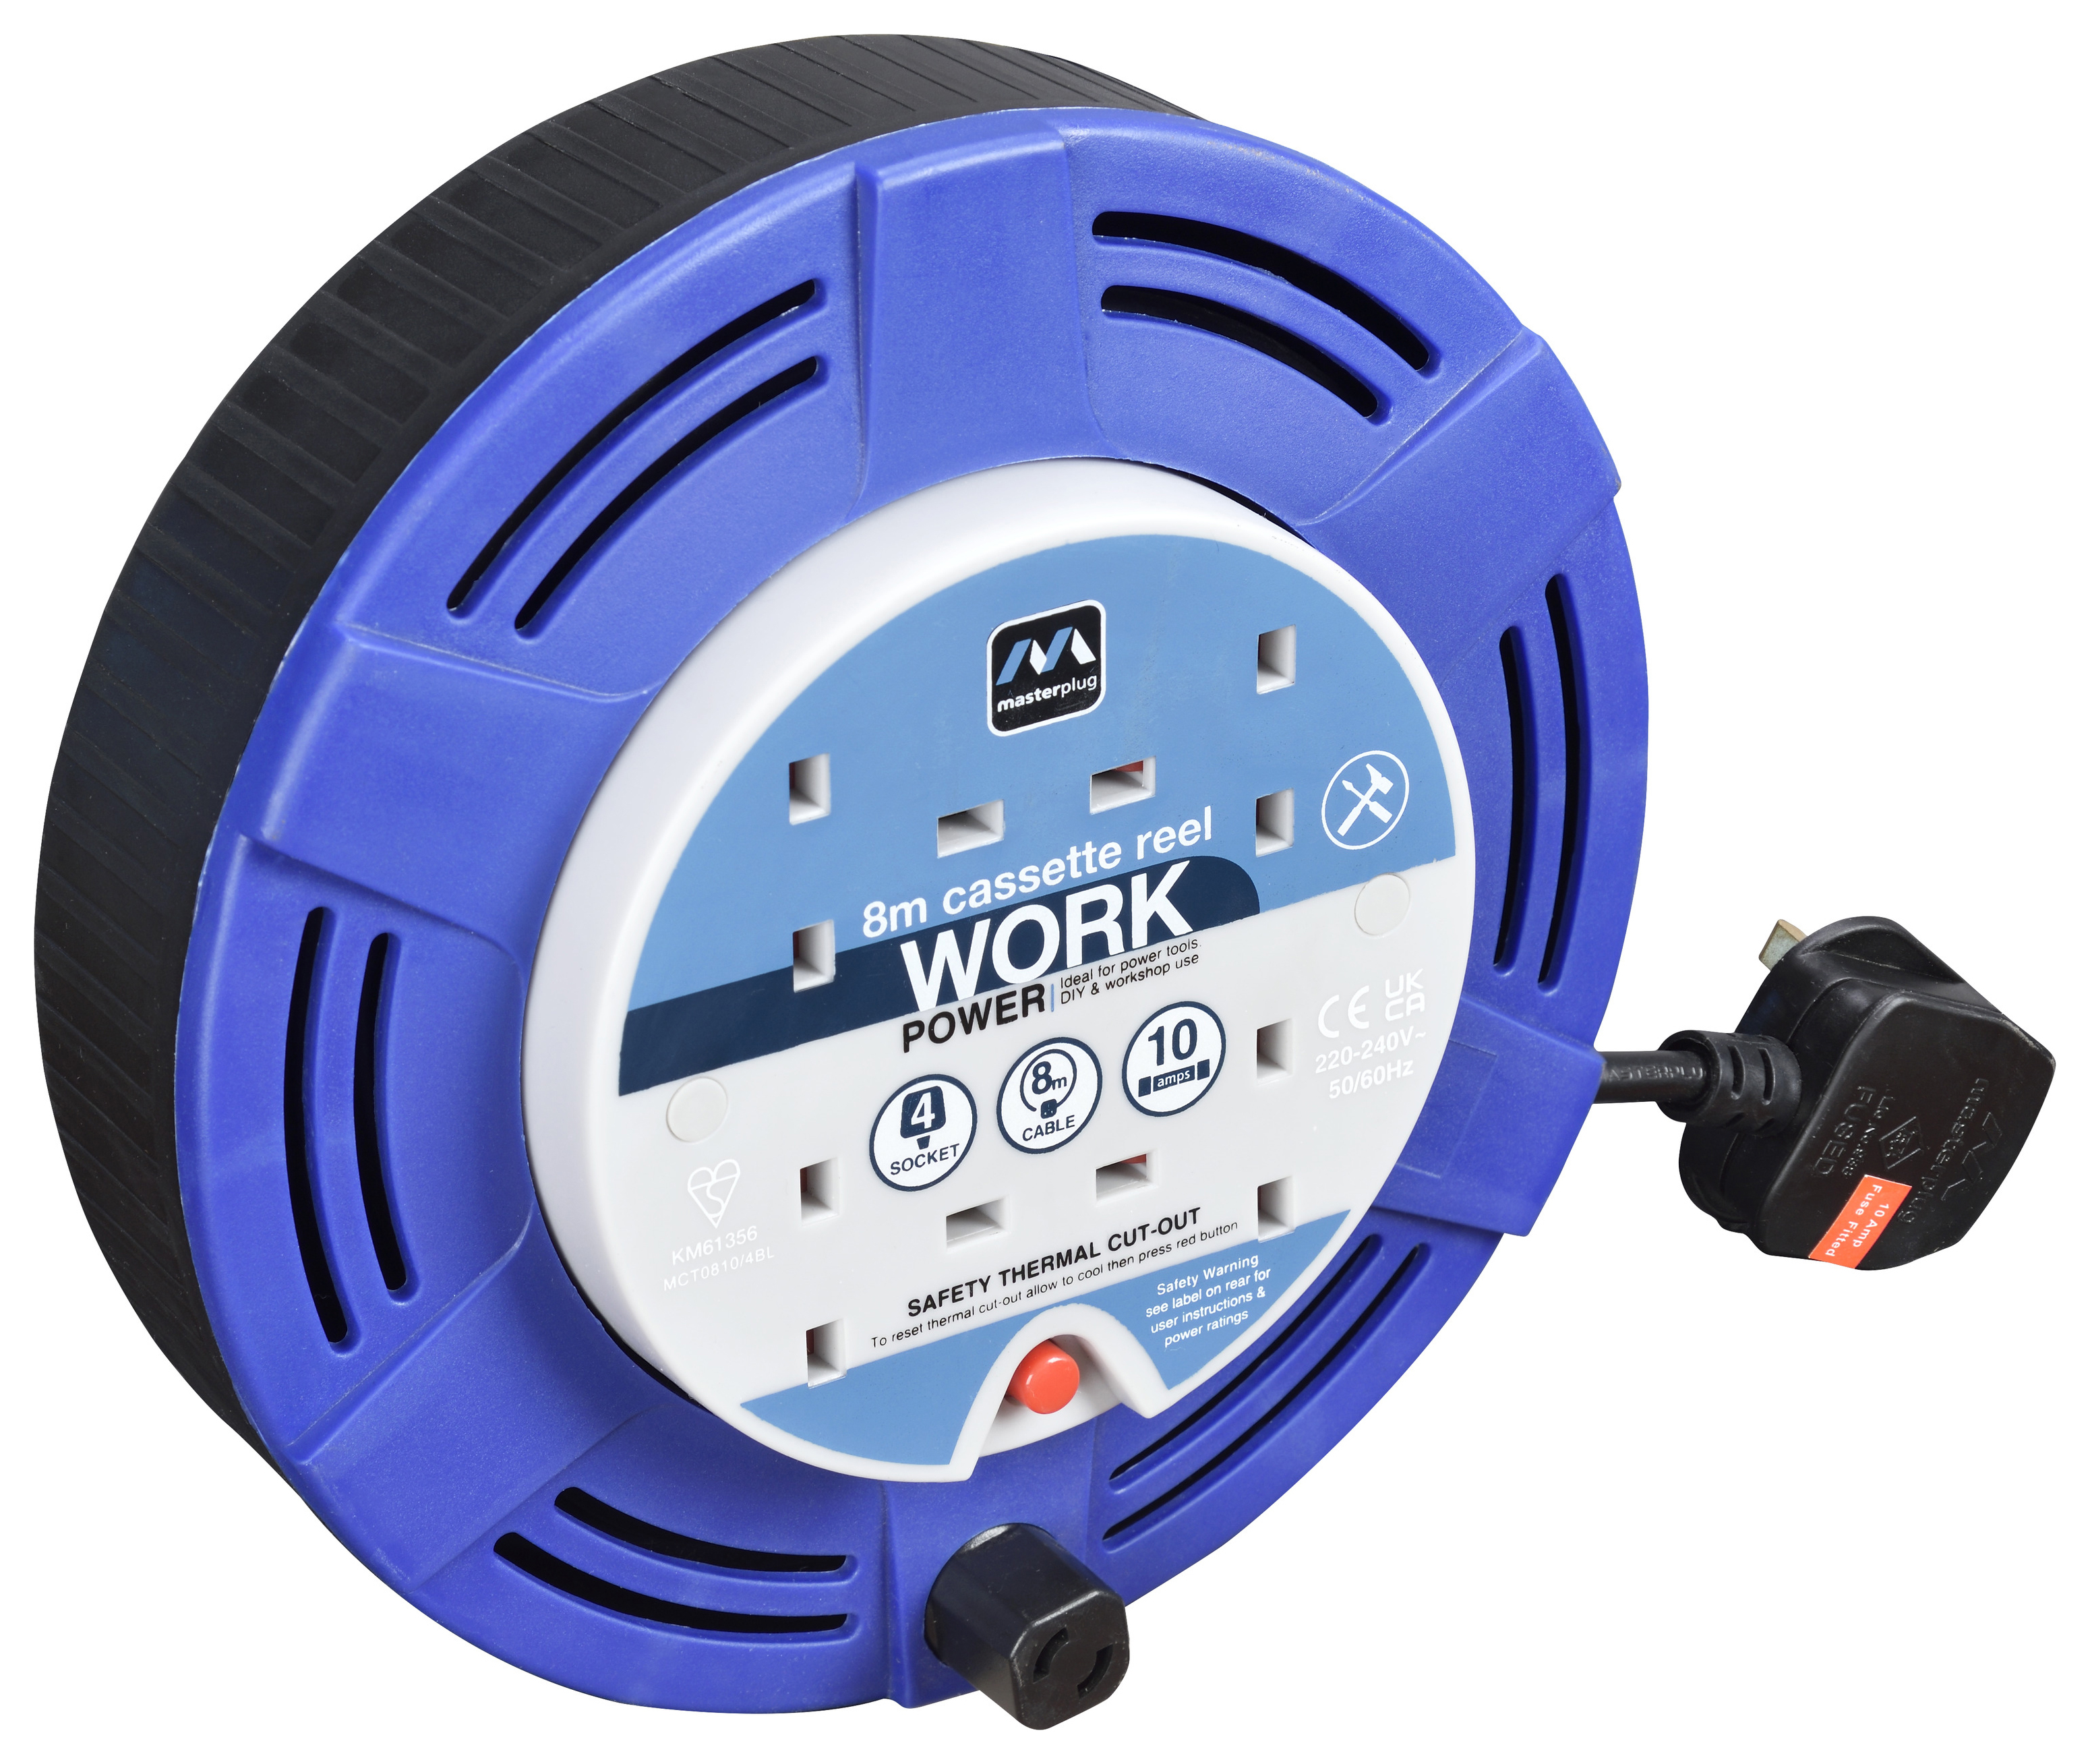 Masterplug 4 Socket 8m 10A Cassette Reel with Thermal Cut-Out - Blue